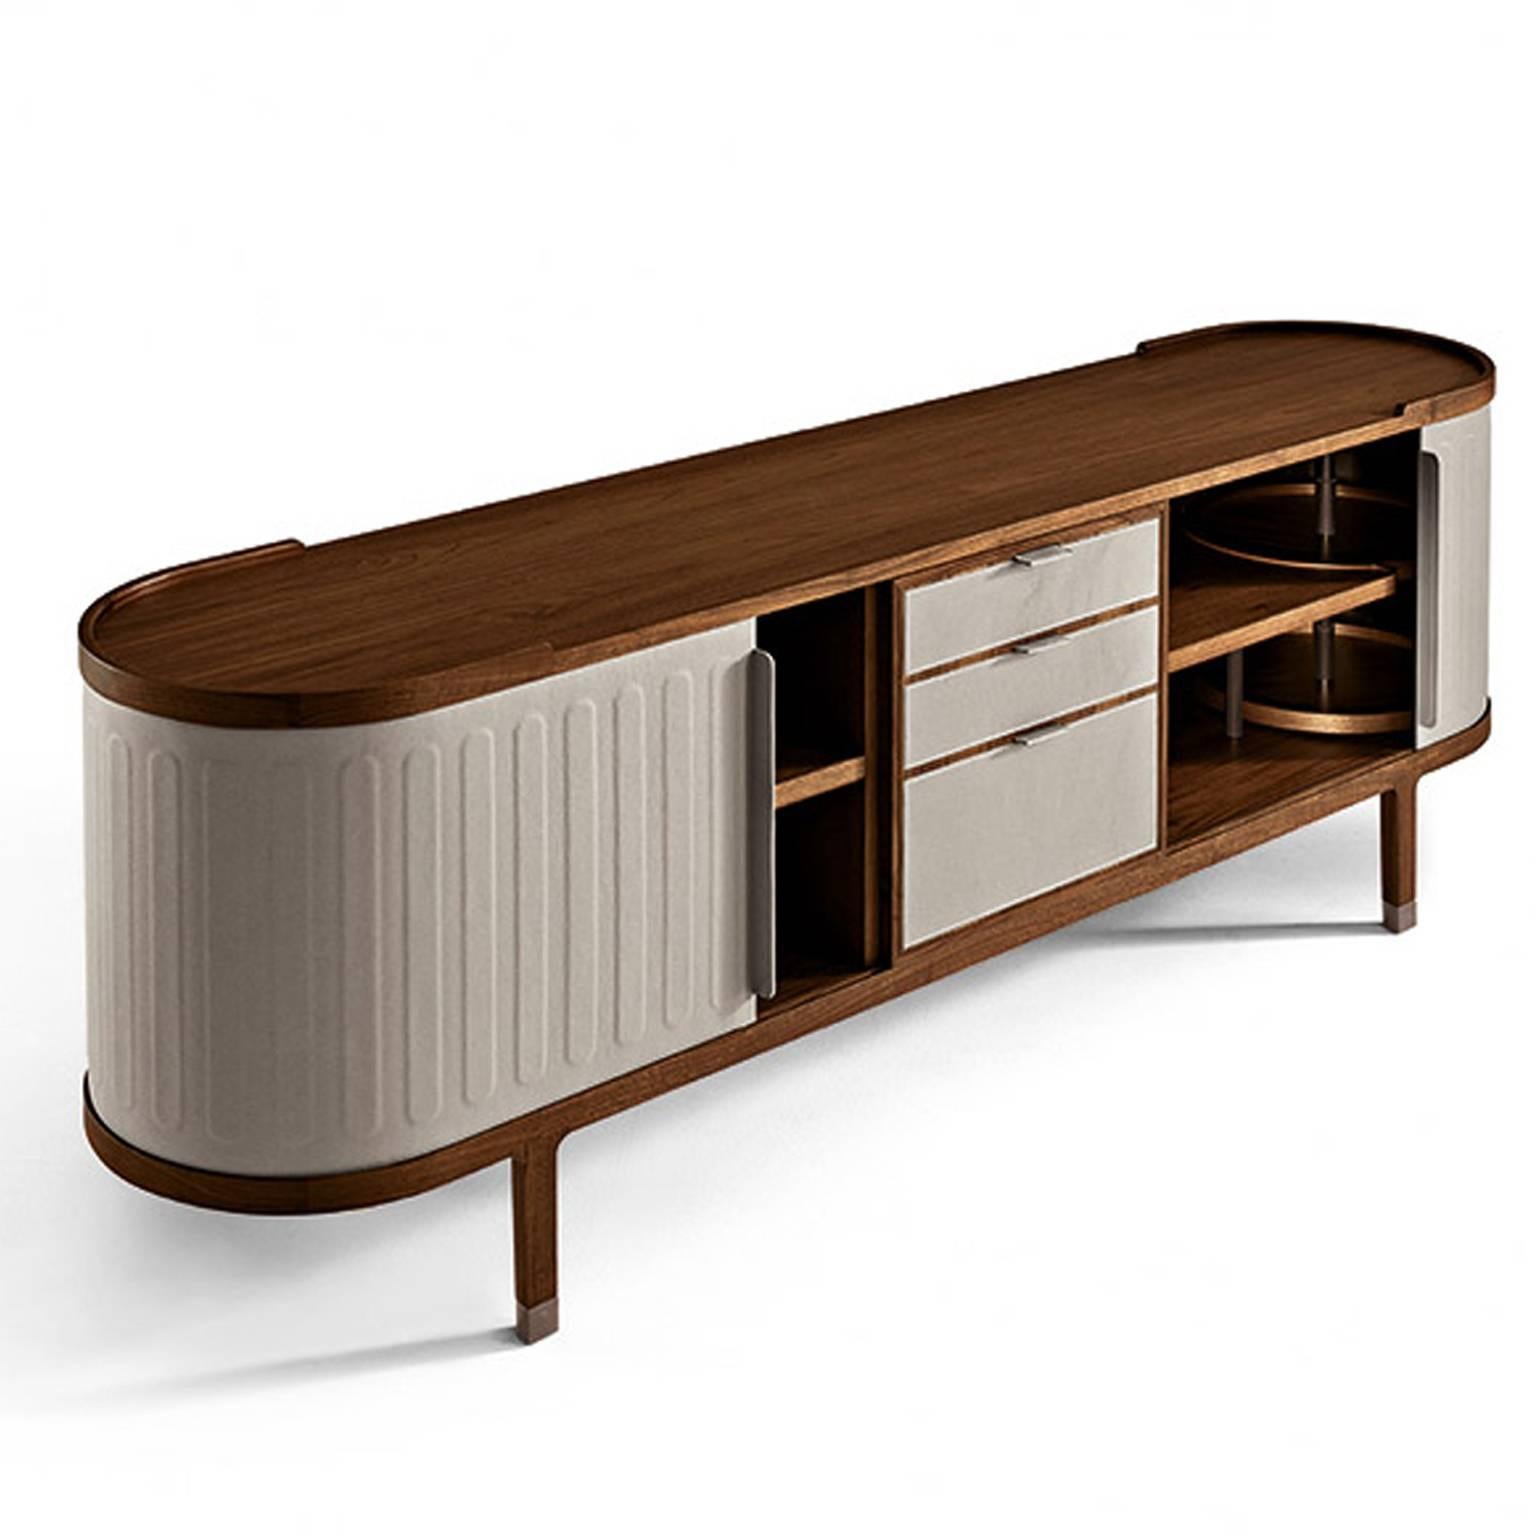 Cabinet by Chi Wing to for Giorgetti available from showroom display in solid walnut Canaletto wood wrapped in saddle leather. Pull sliding doors, self closing drawers and adjustable shelving with swivel trays included. Metal parts in painted